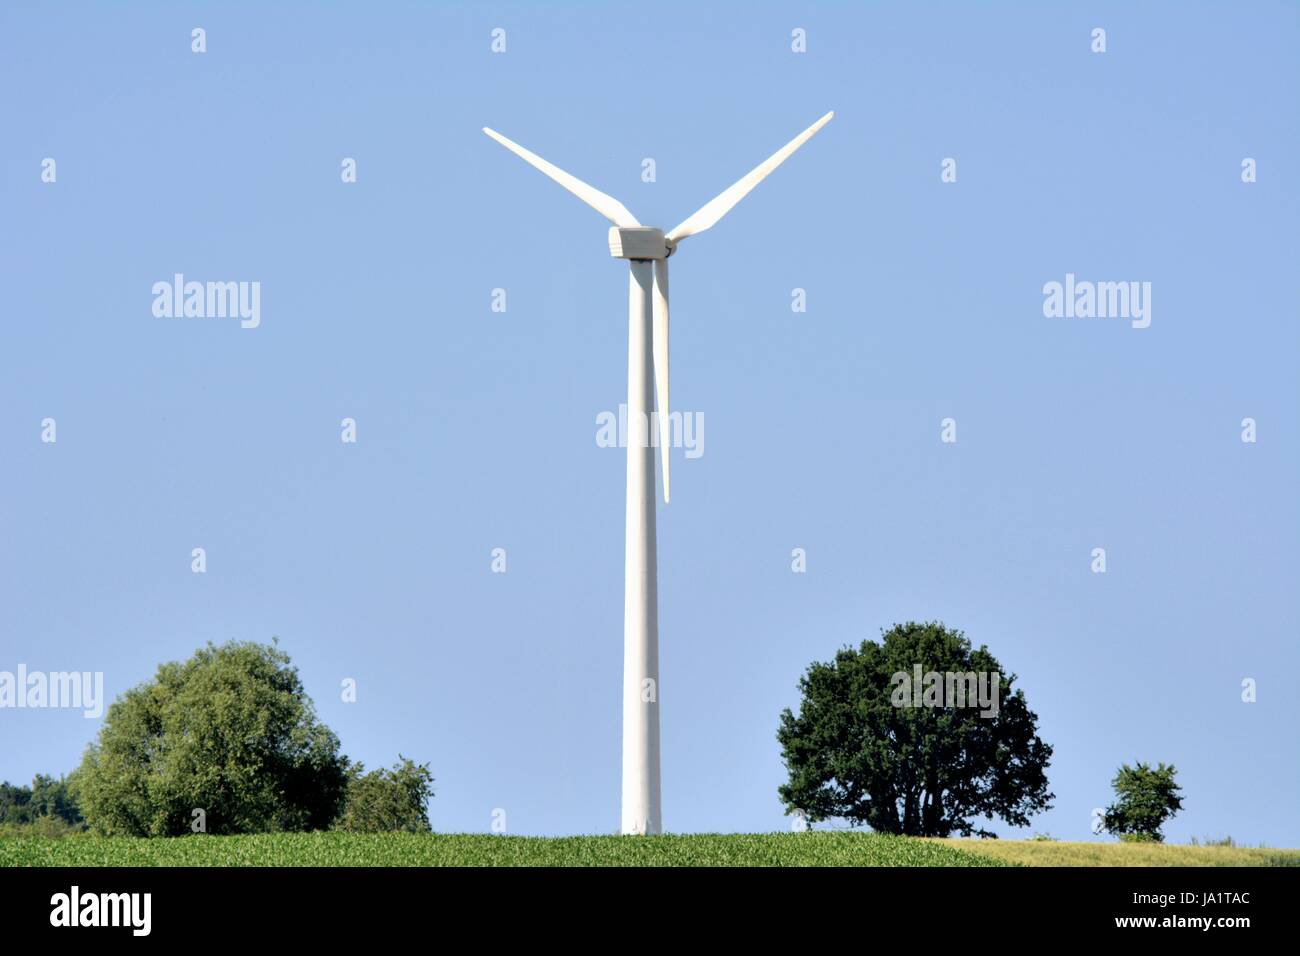 energy, power, electricity, electric power, wind force, wind energy, eco, Stock Photo